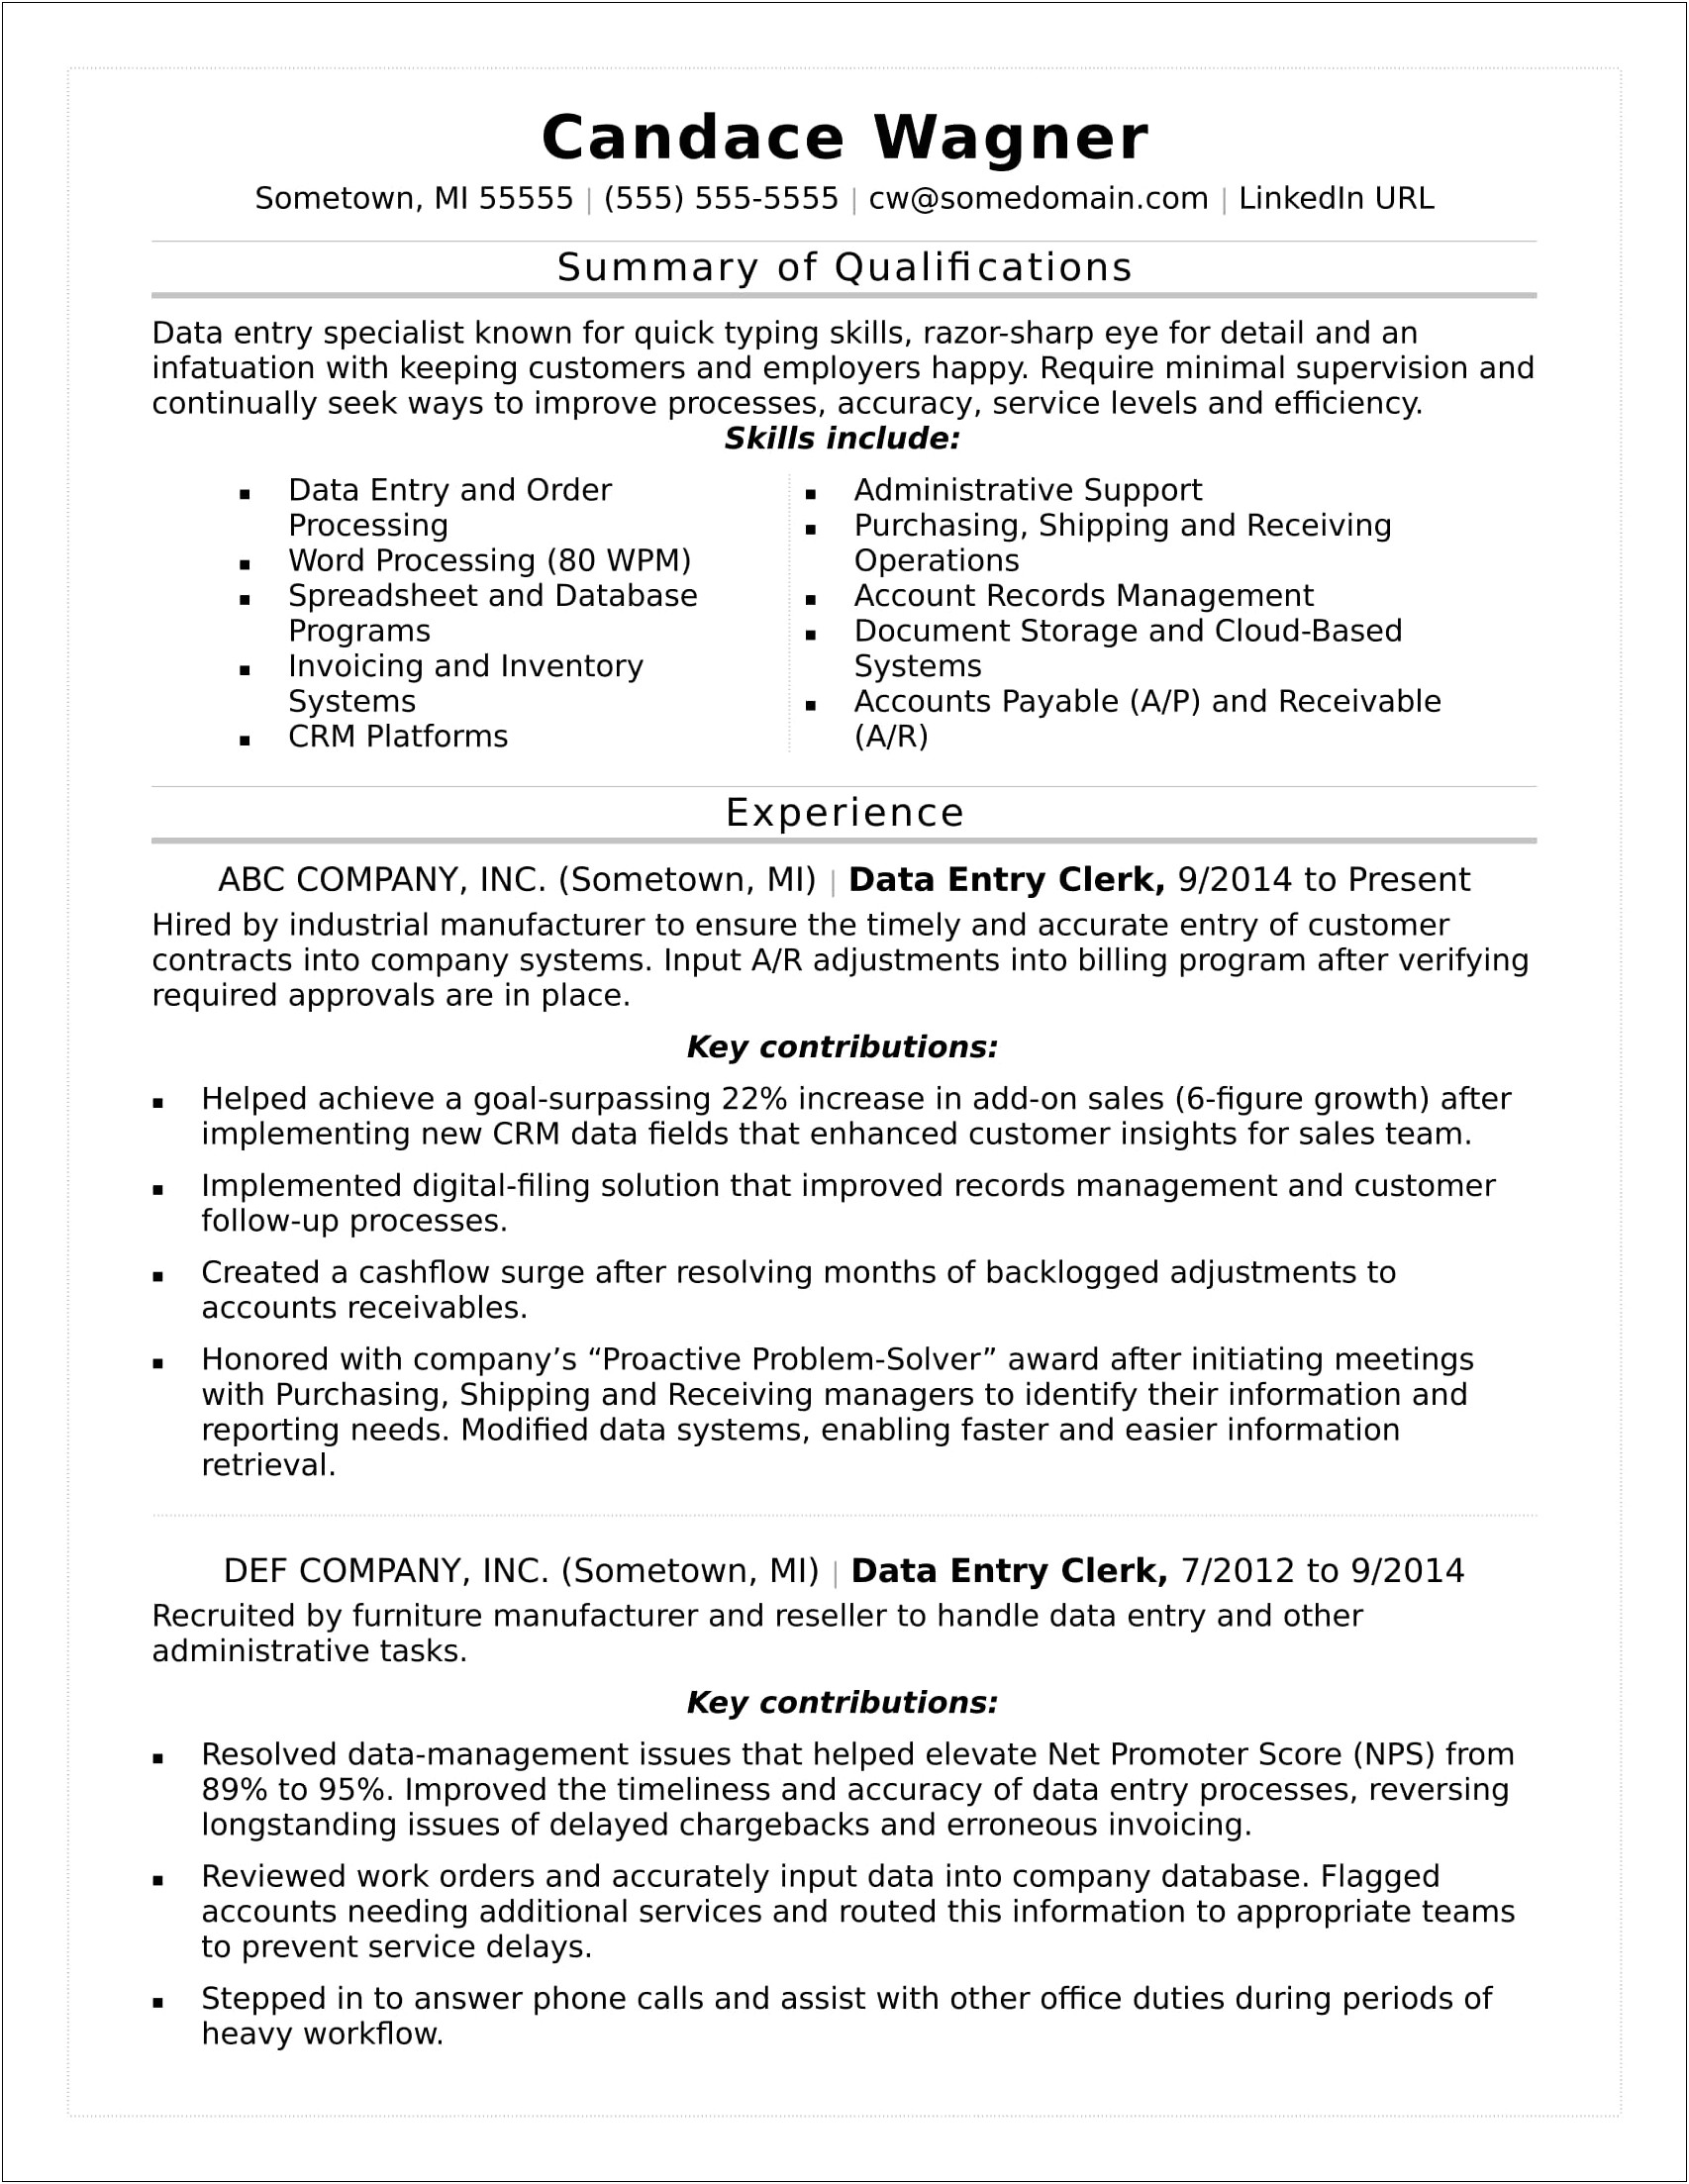 Writing A Summary Of Skills In Resume